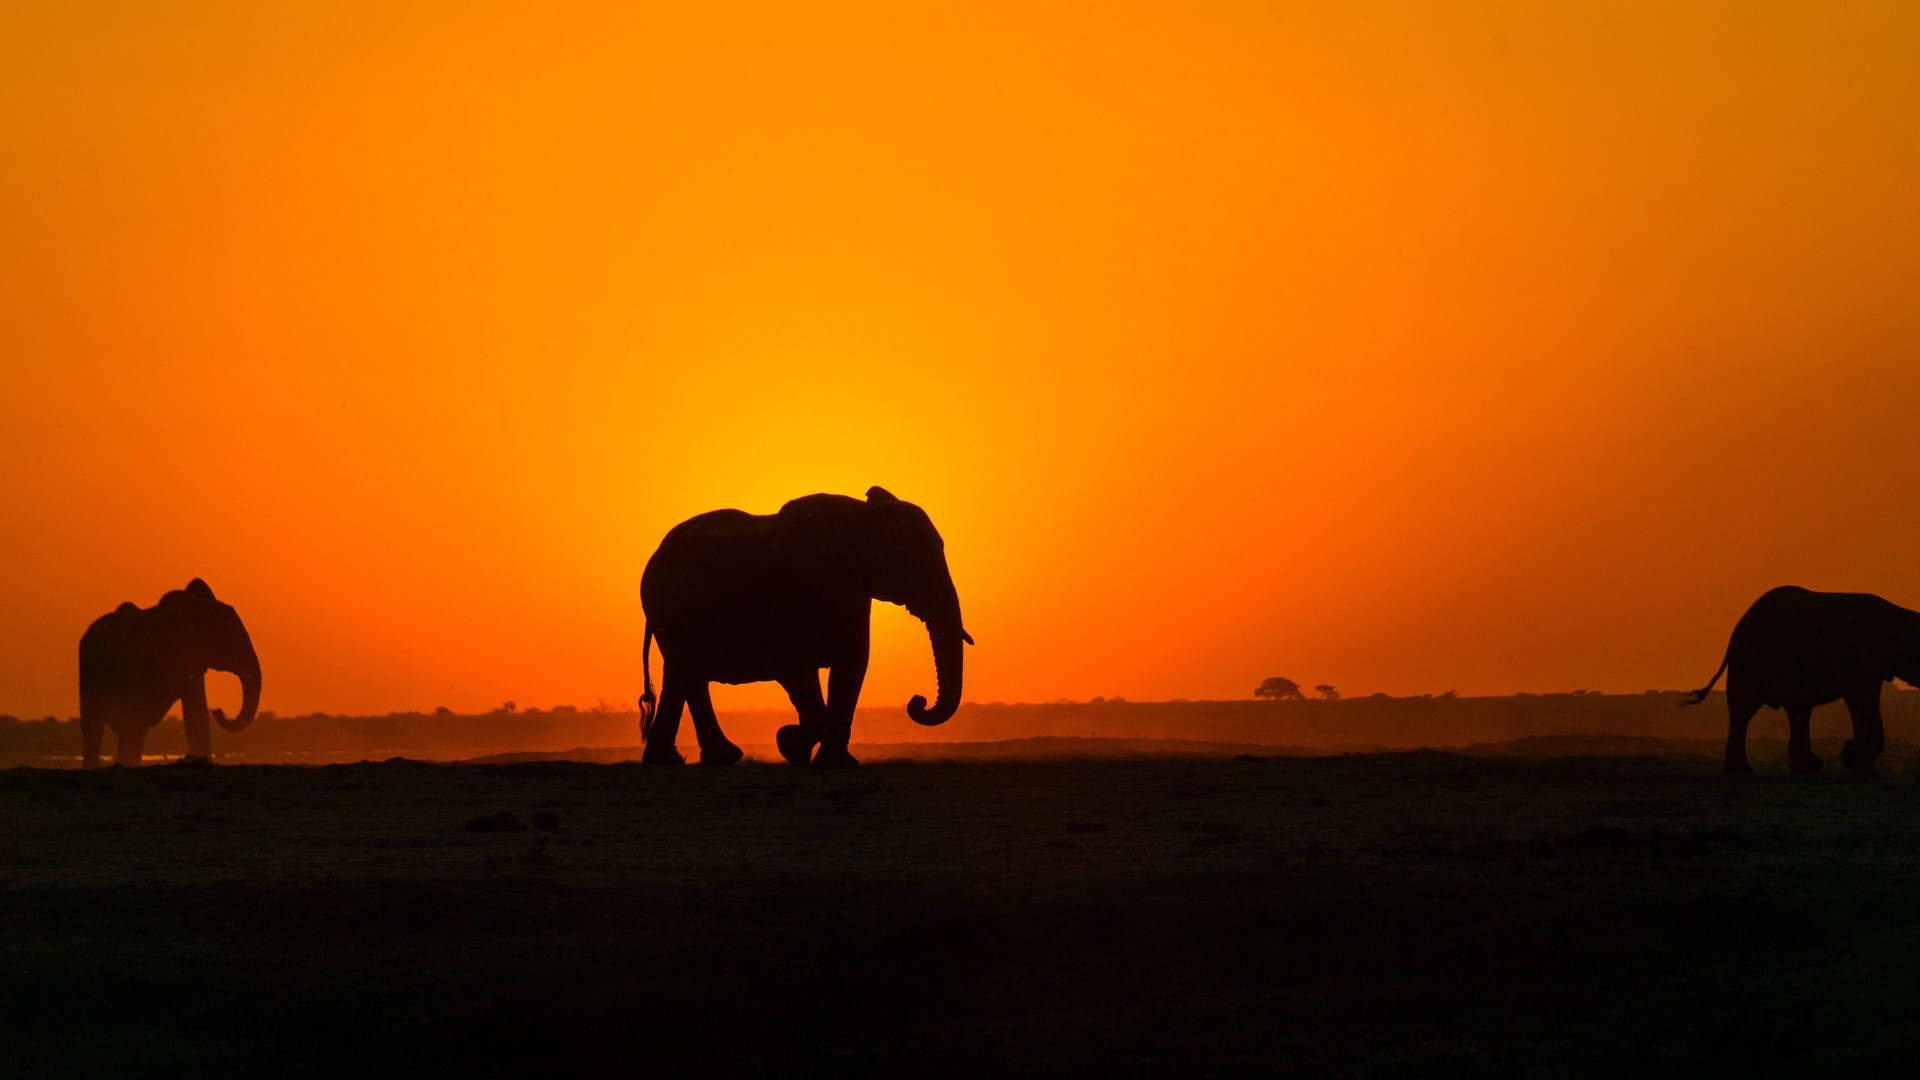 Silhouette Of Elephants Africa 4k Picture